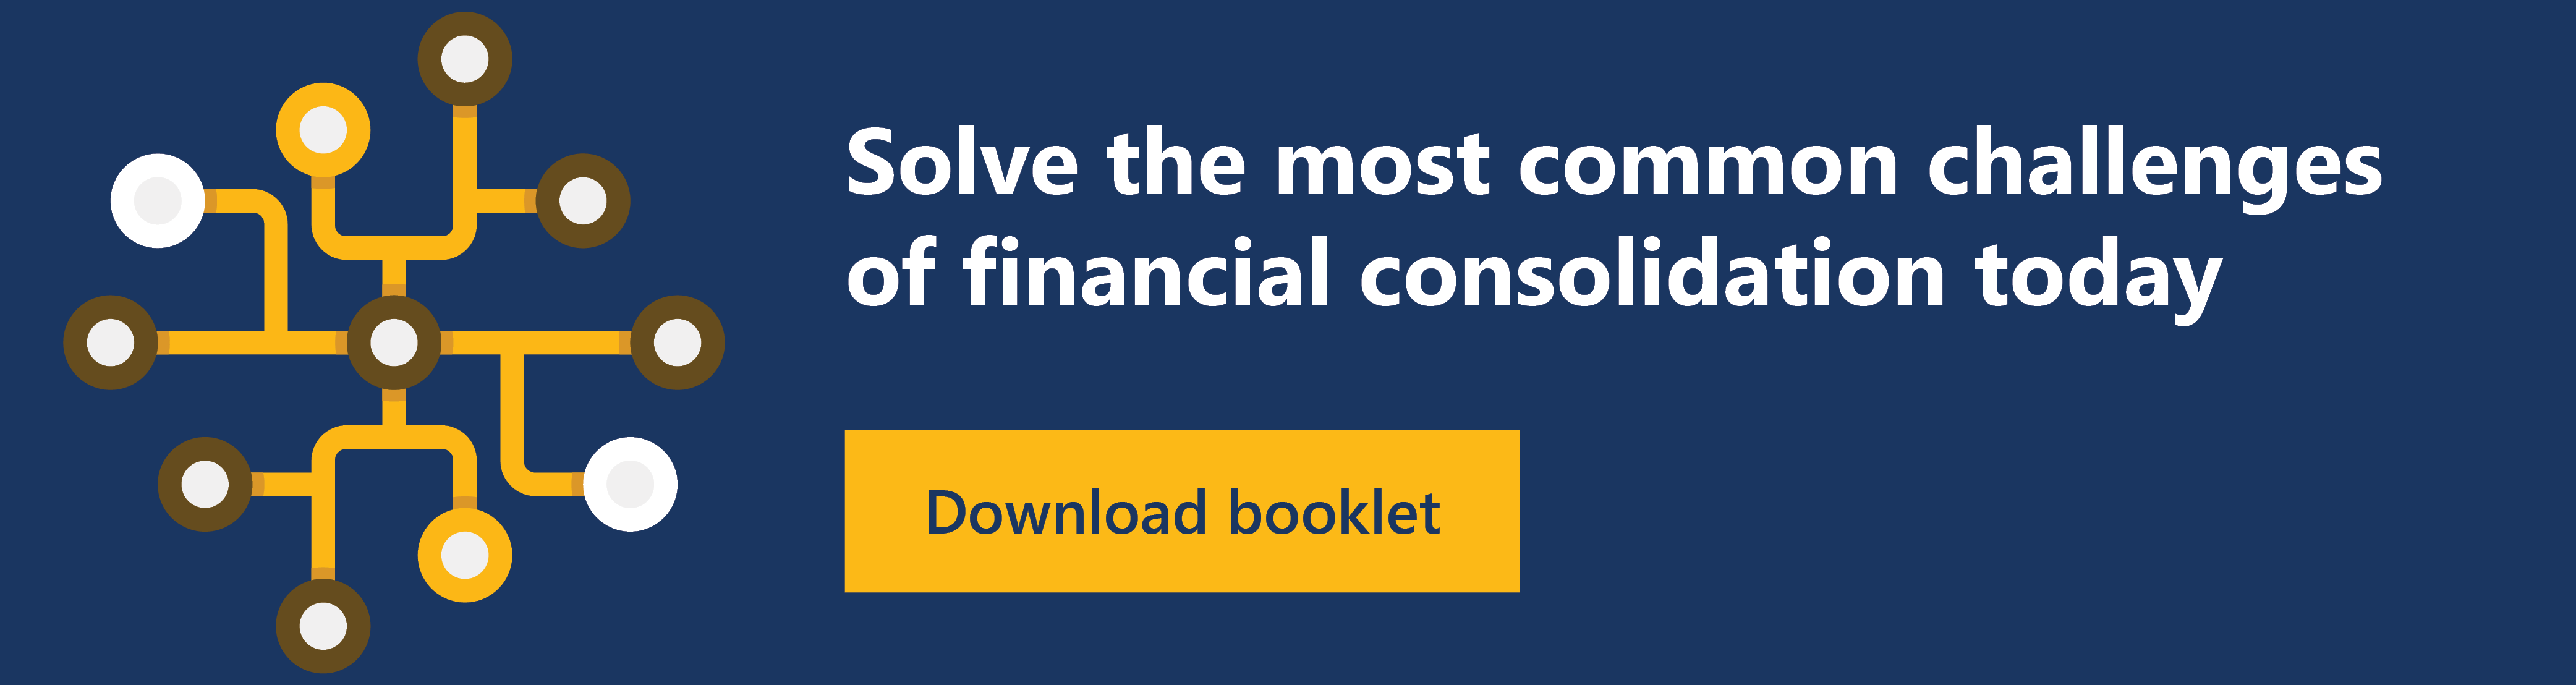 regulations for financial consolidation | challenges of consolidation booklet